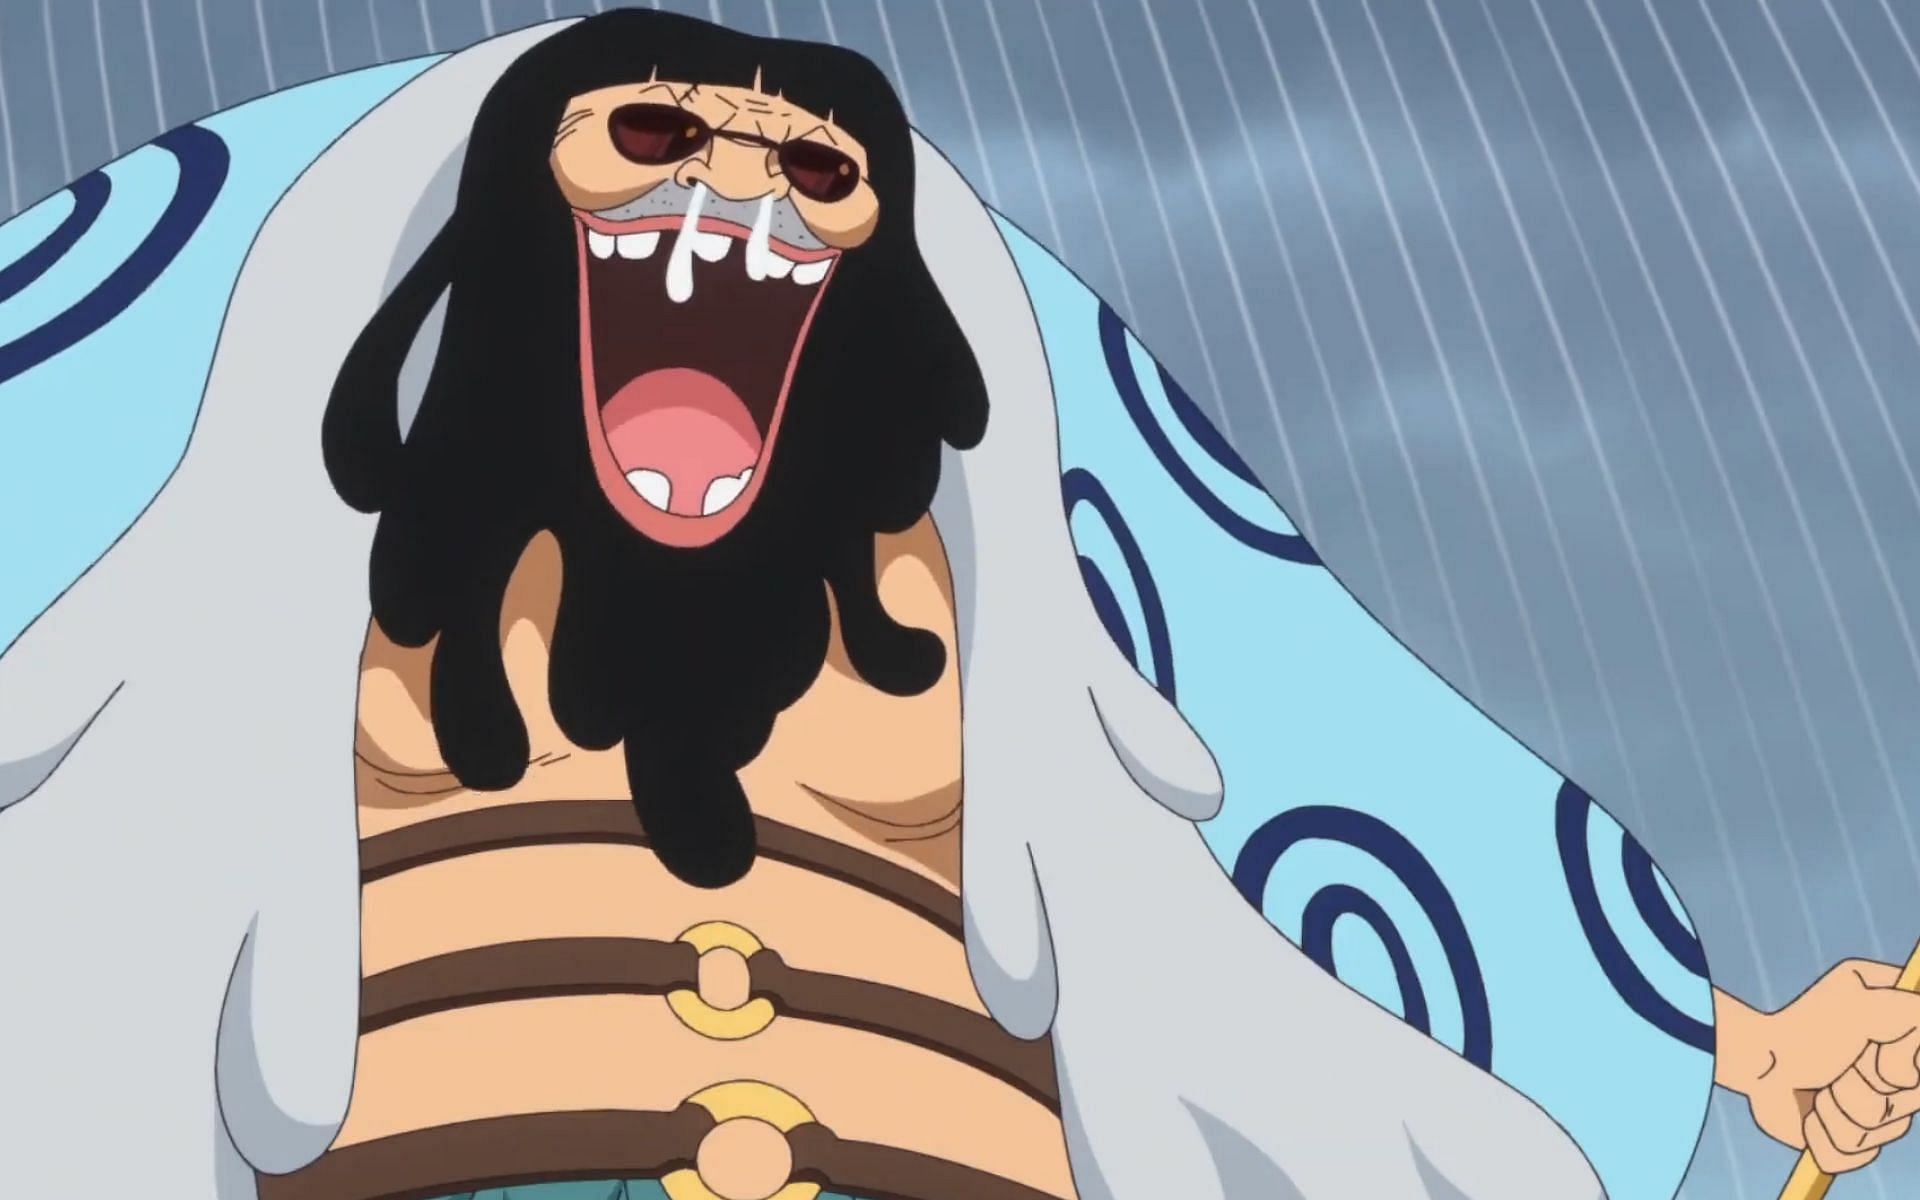 Trebol is widely considered to be one of the least appealing characters in One Piece (Image Credits: Eiichiro Oda/Shueisha, Viz Media)